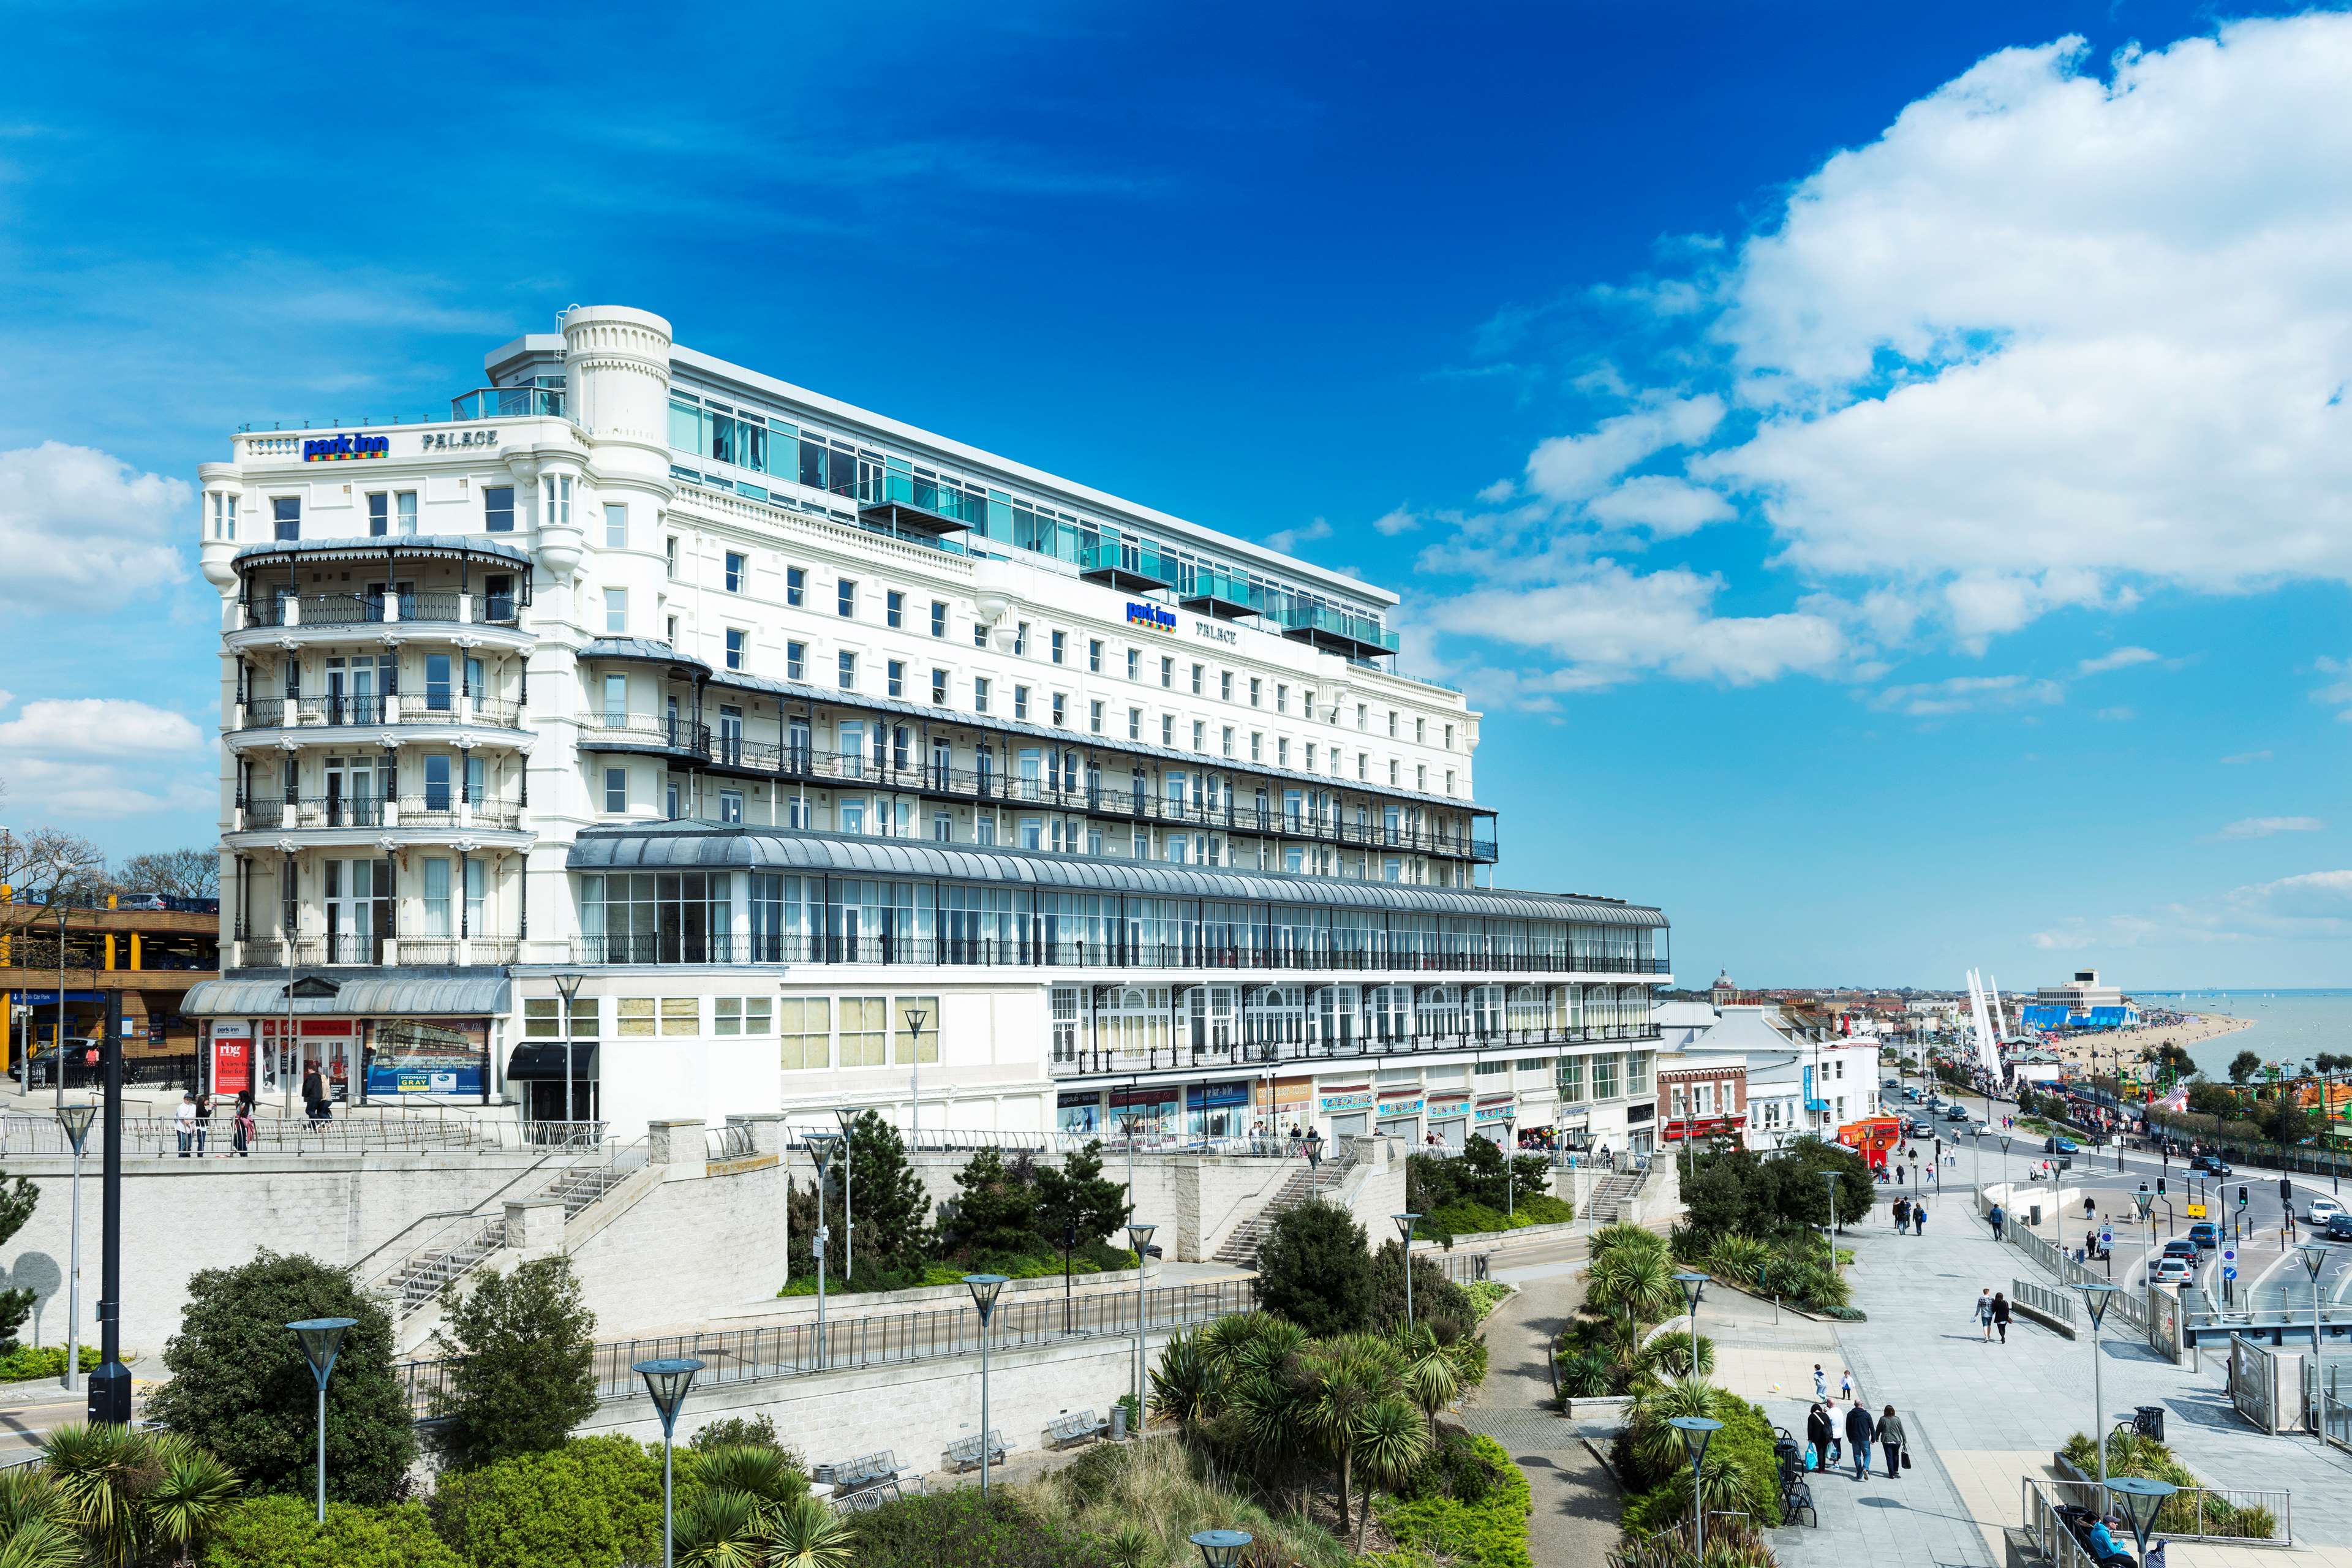 Images Park Inn by Radisson Palace, Southend-on-Sea